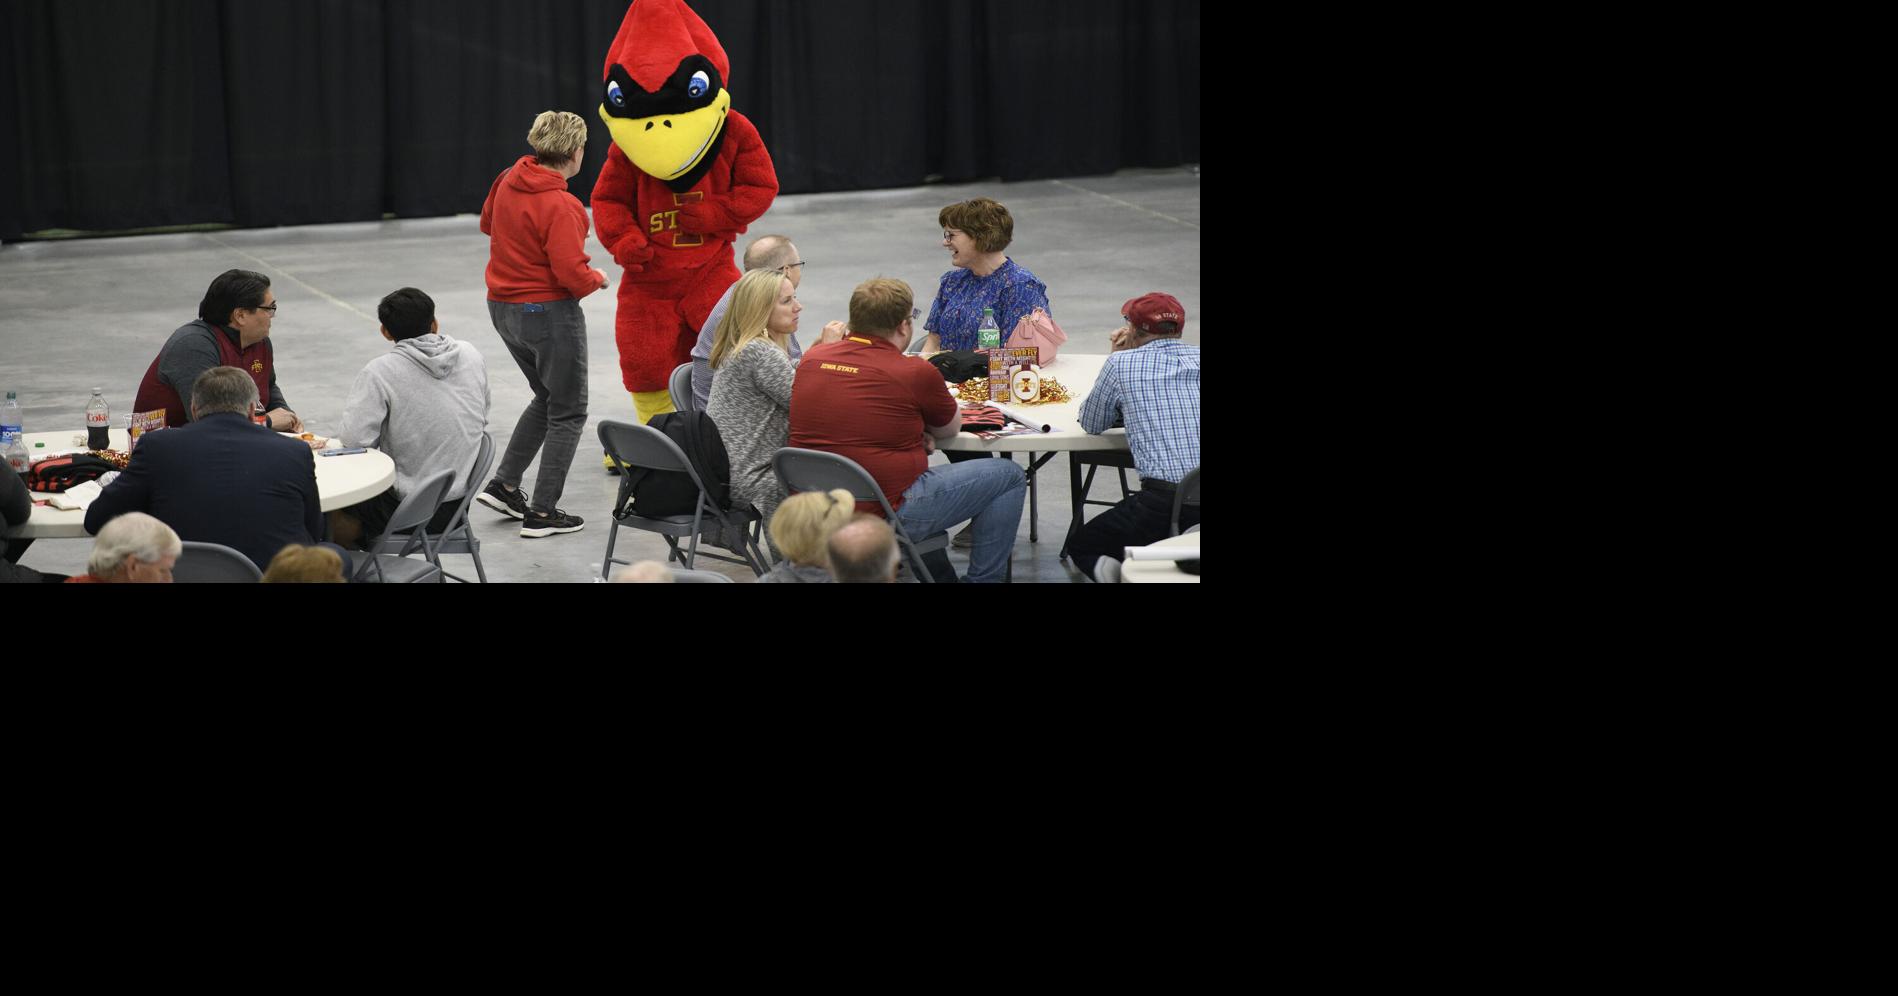 Cyclones' Tailgate Tour makes stop in Sioux City